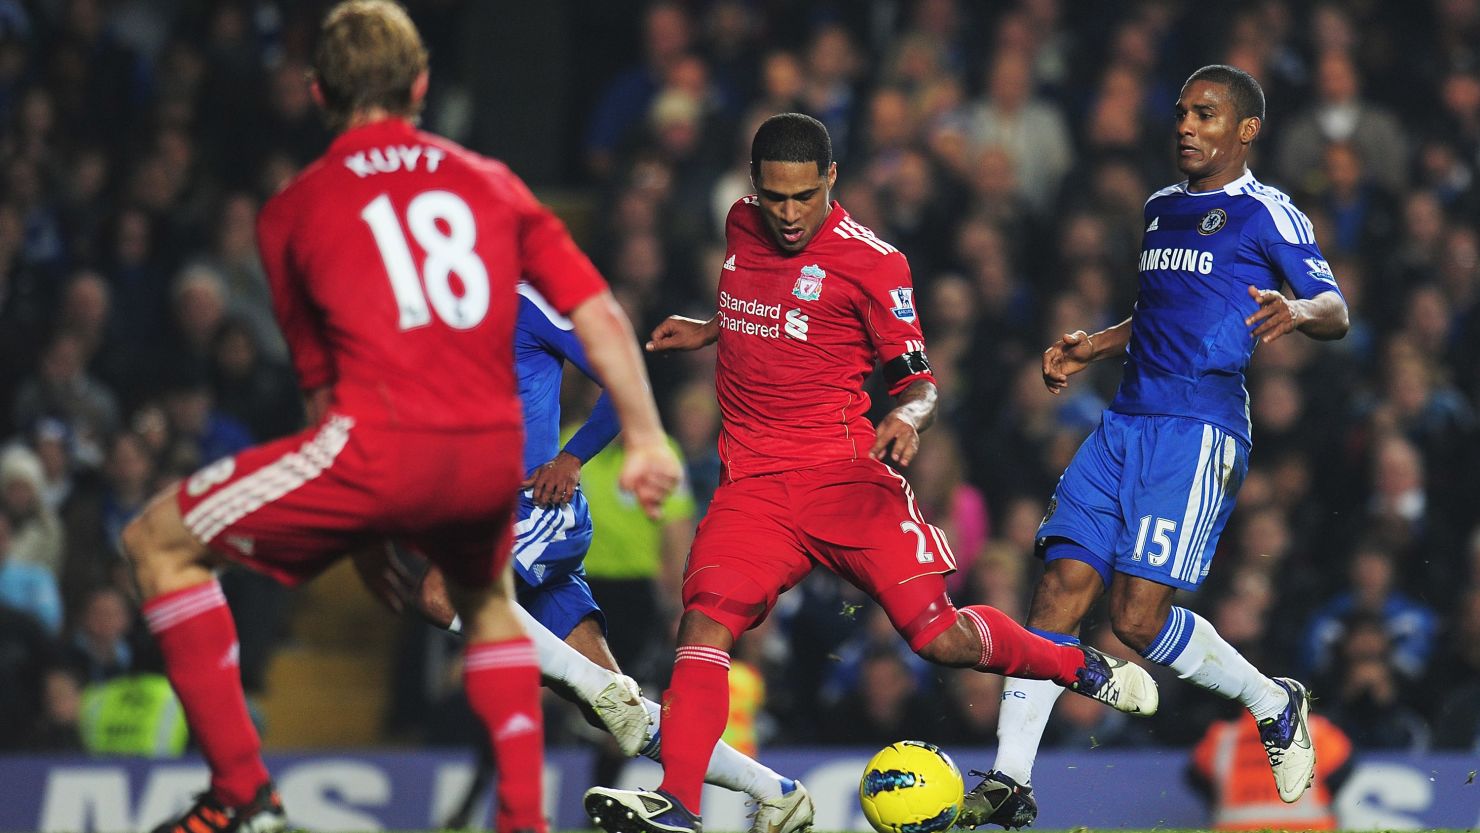 Glen Johnson's stunning late goal saw Chelsea slump to another home defeat.